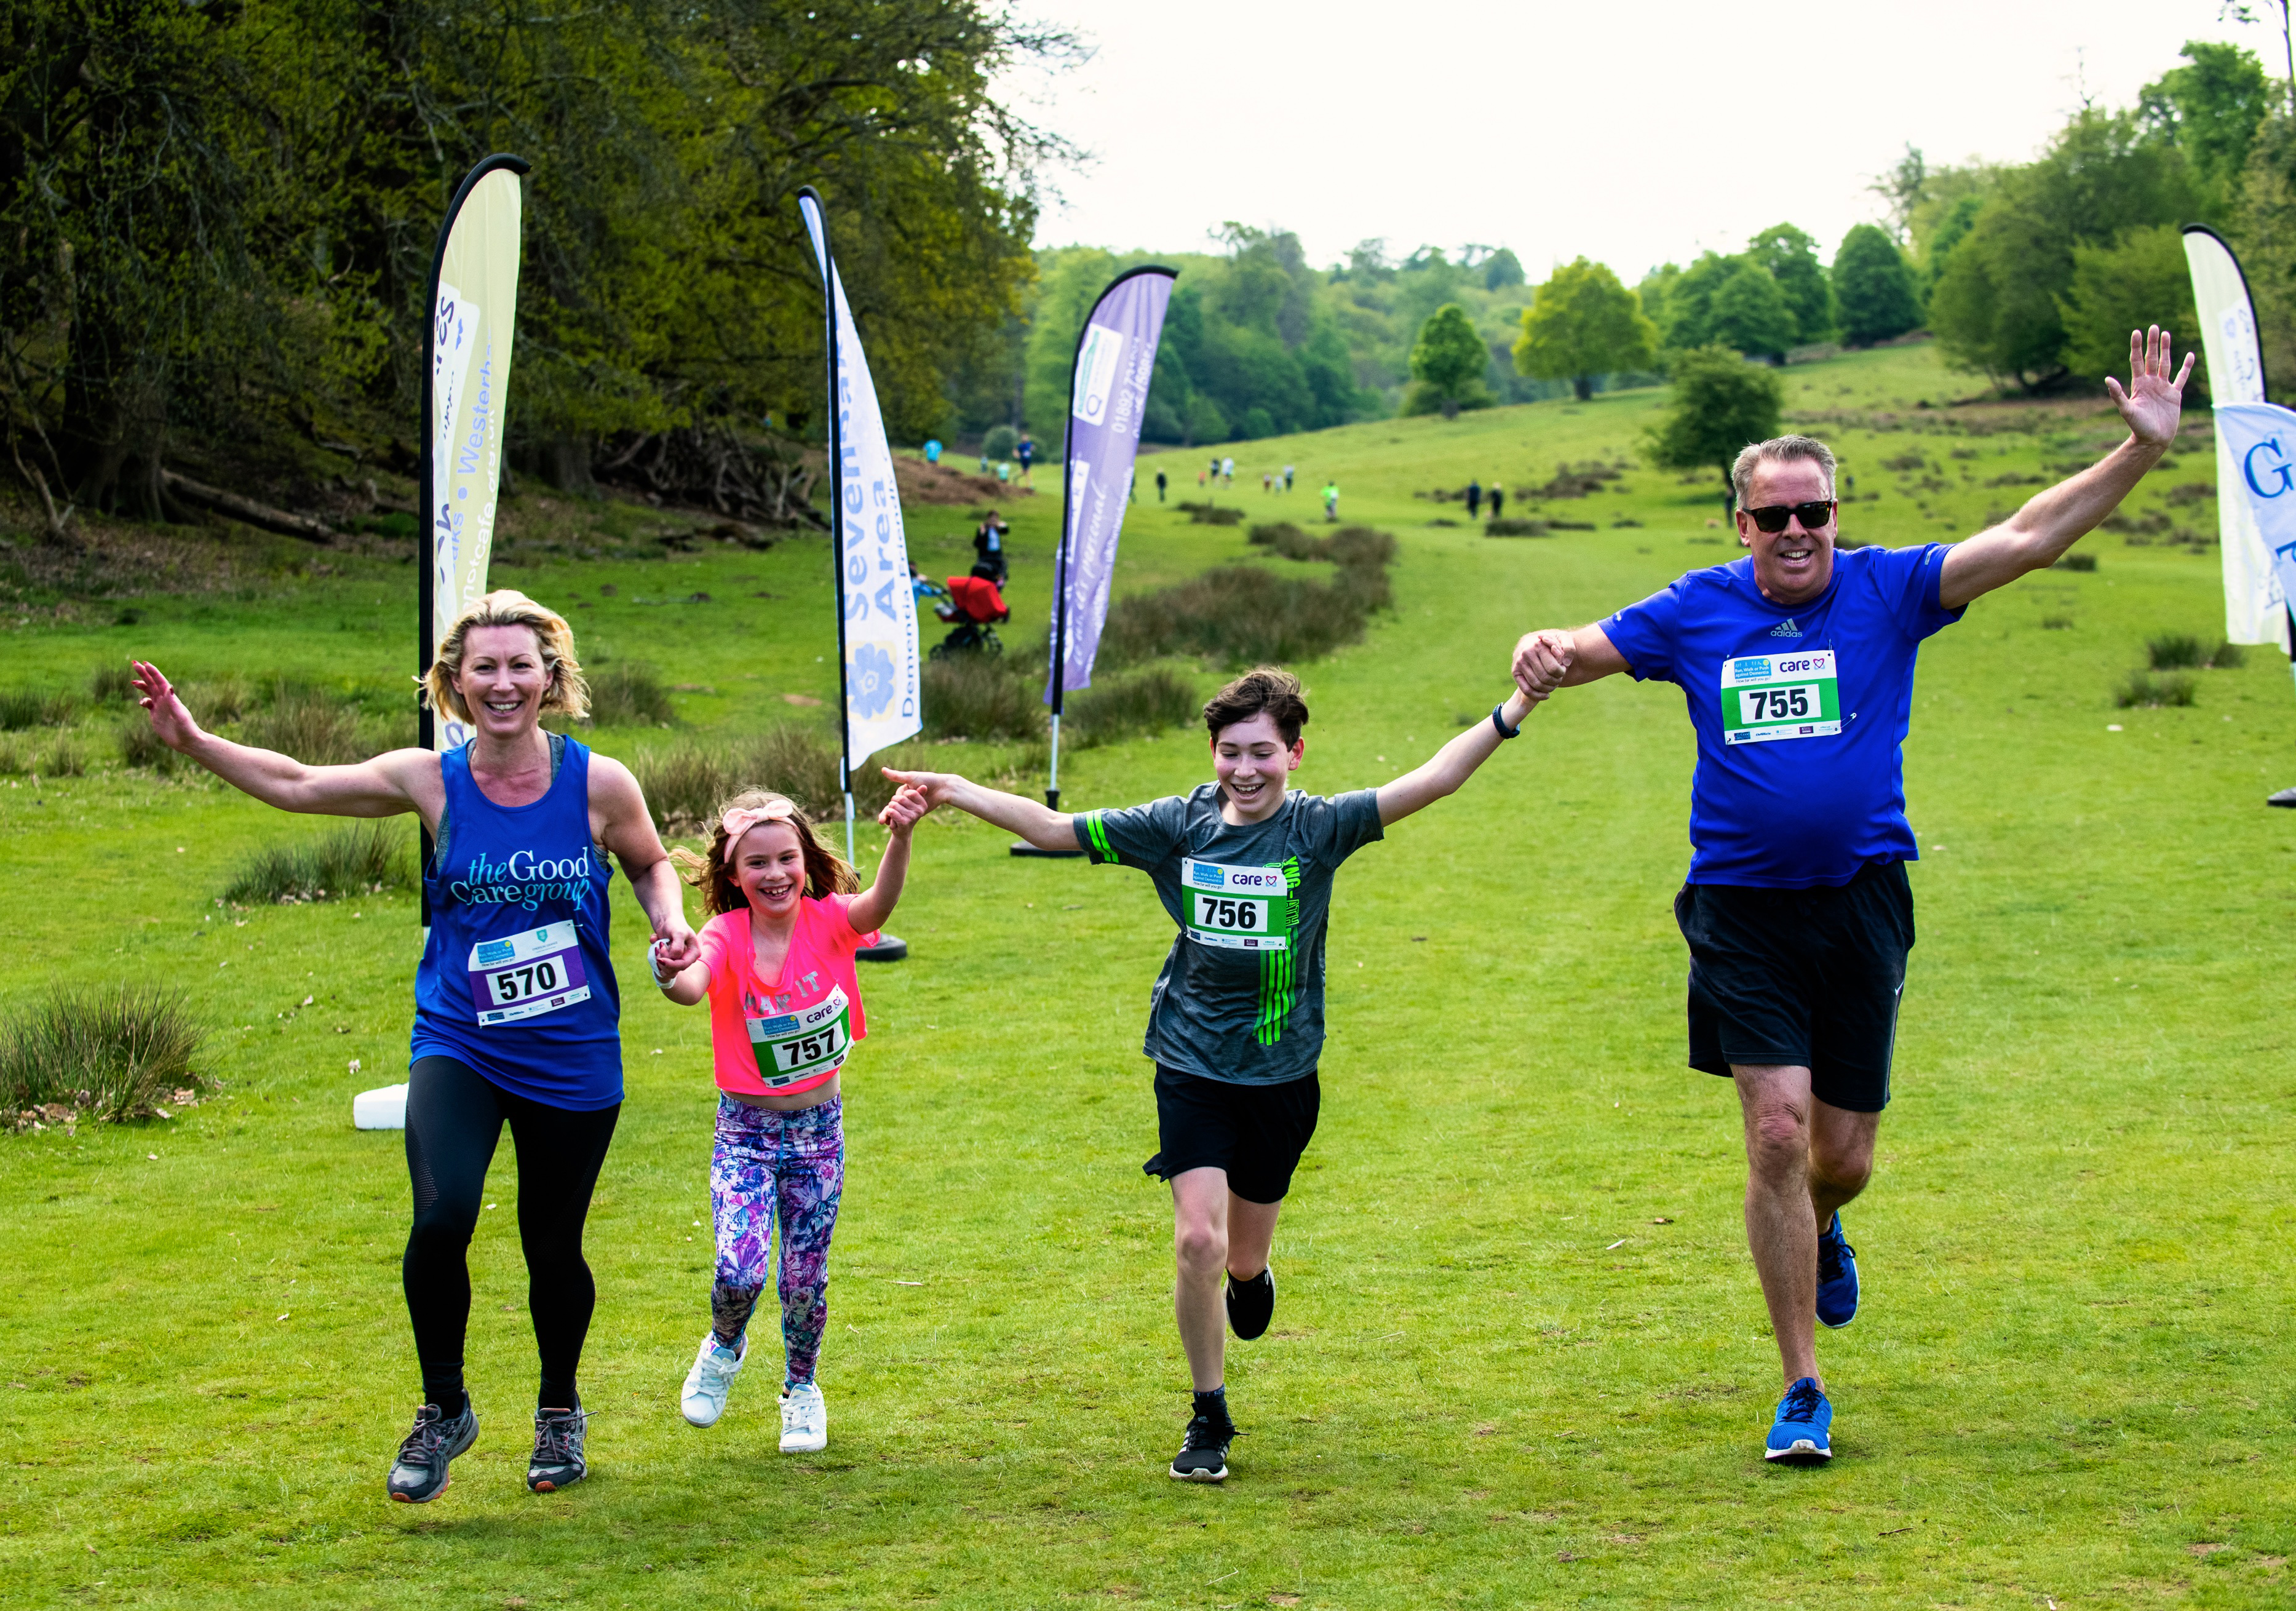 Family of two adults and two children crossing the finishing line at the 2019 event